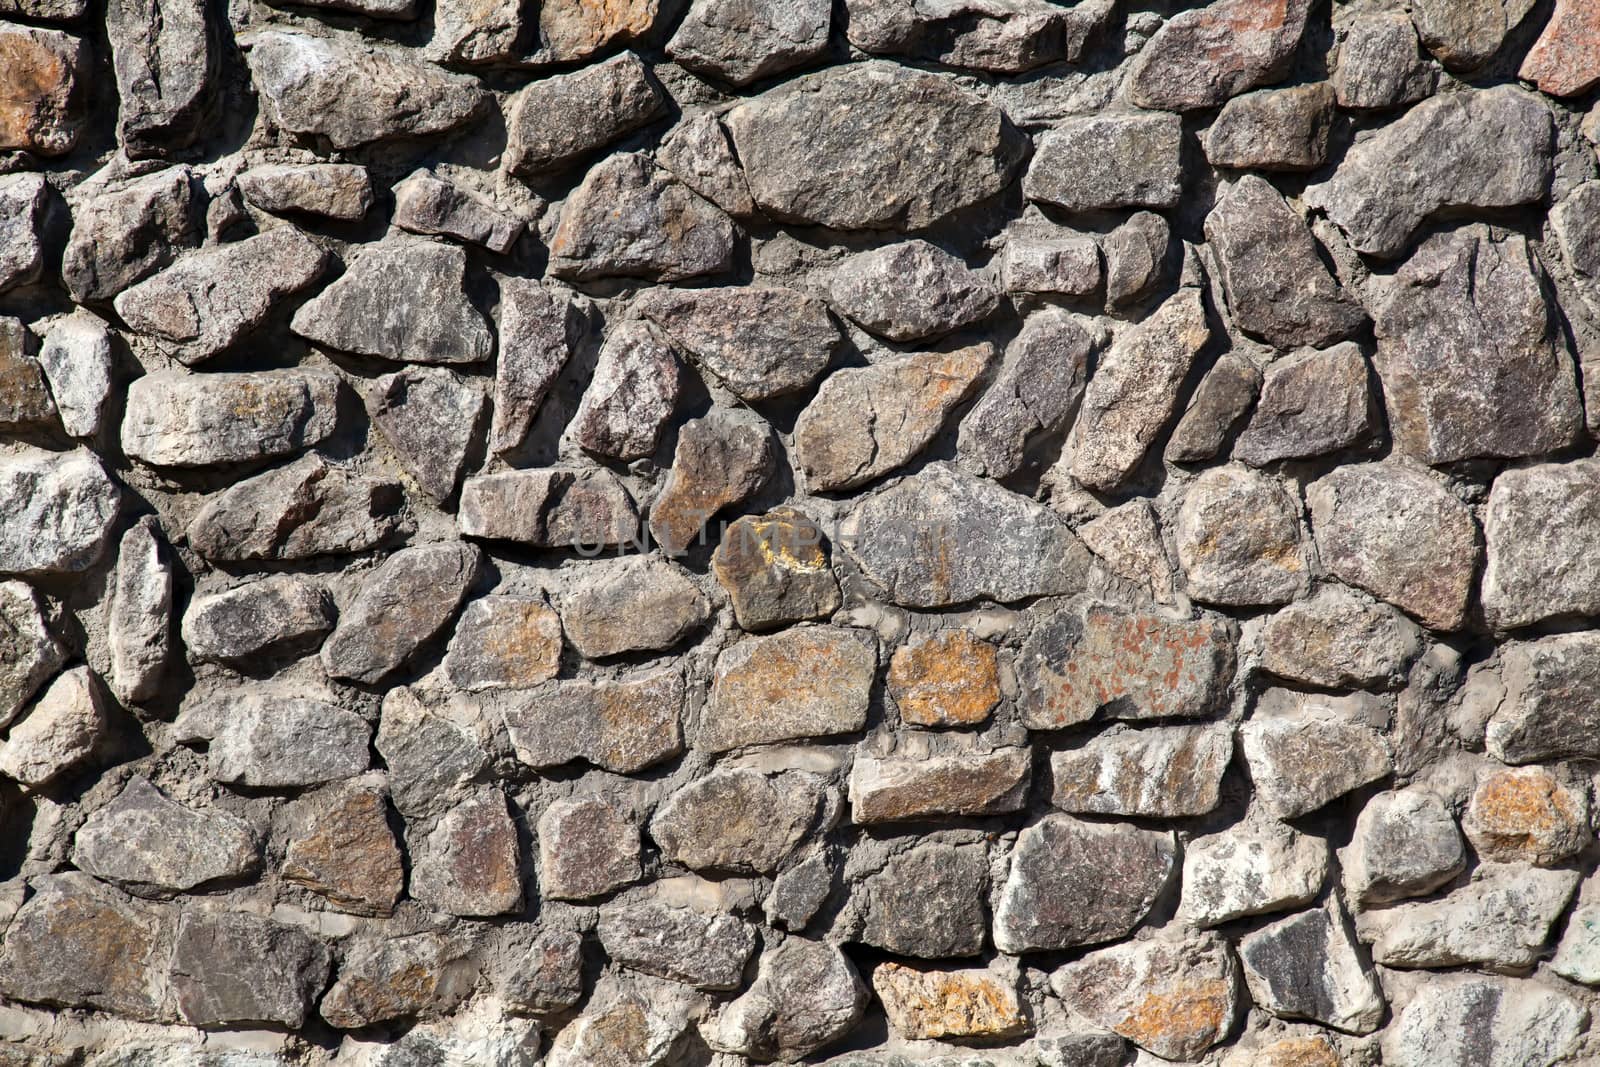 Old gray granite stone wall background